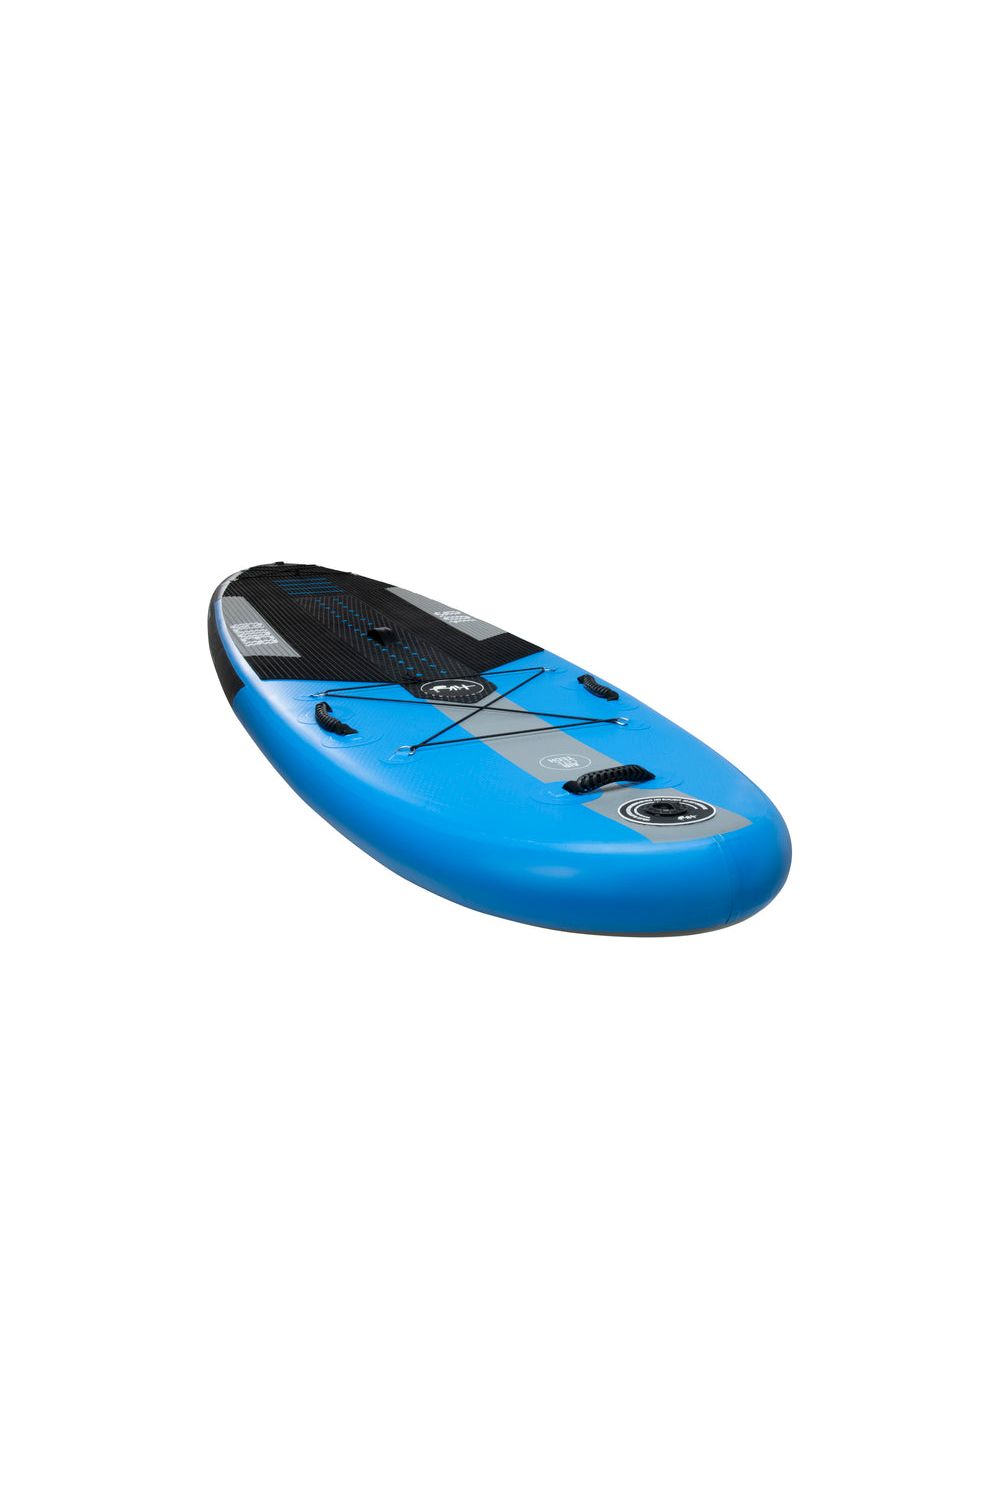 10'6 X 35" X 15Cm Tiki Glider Inflatable Sup (Incl Fin & Deck Pad)